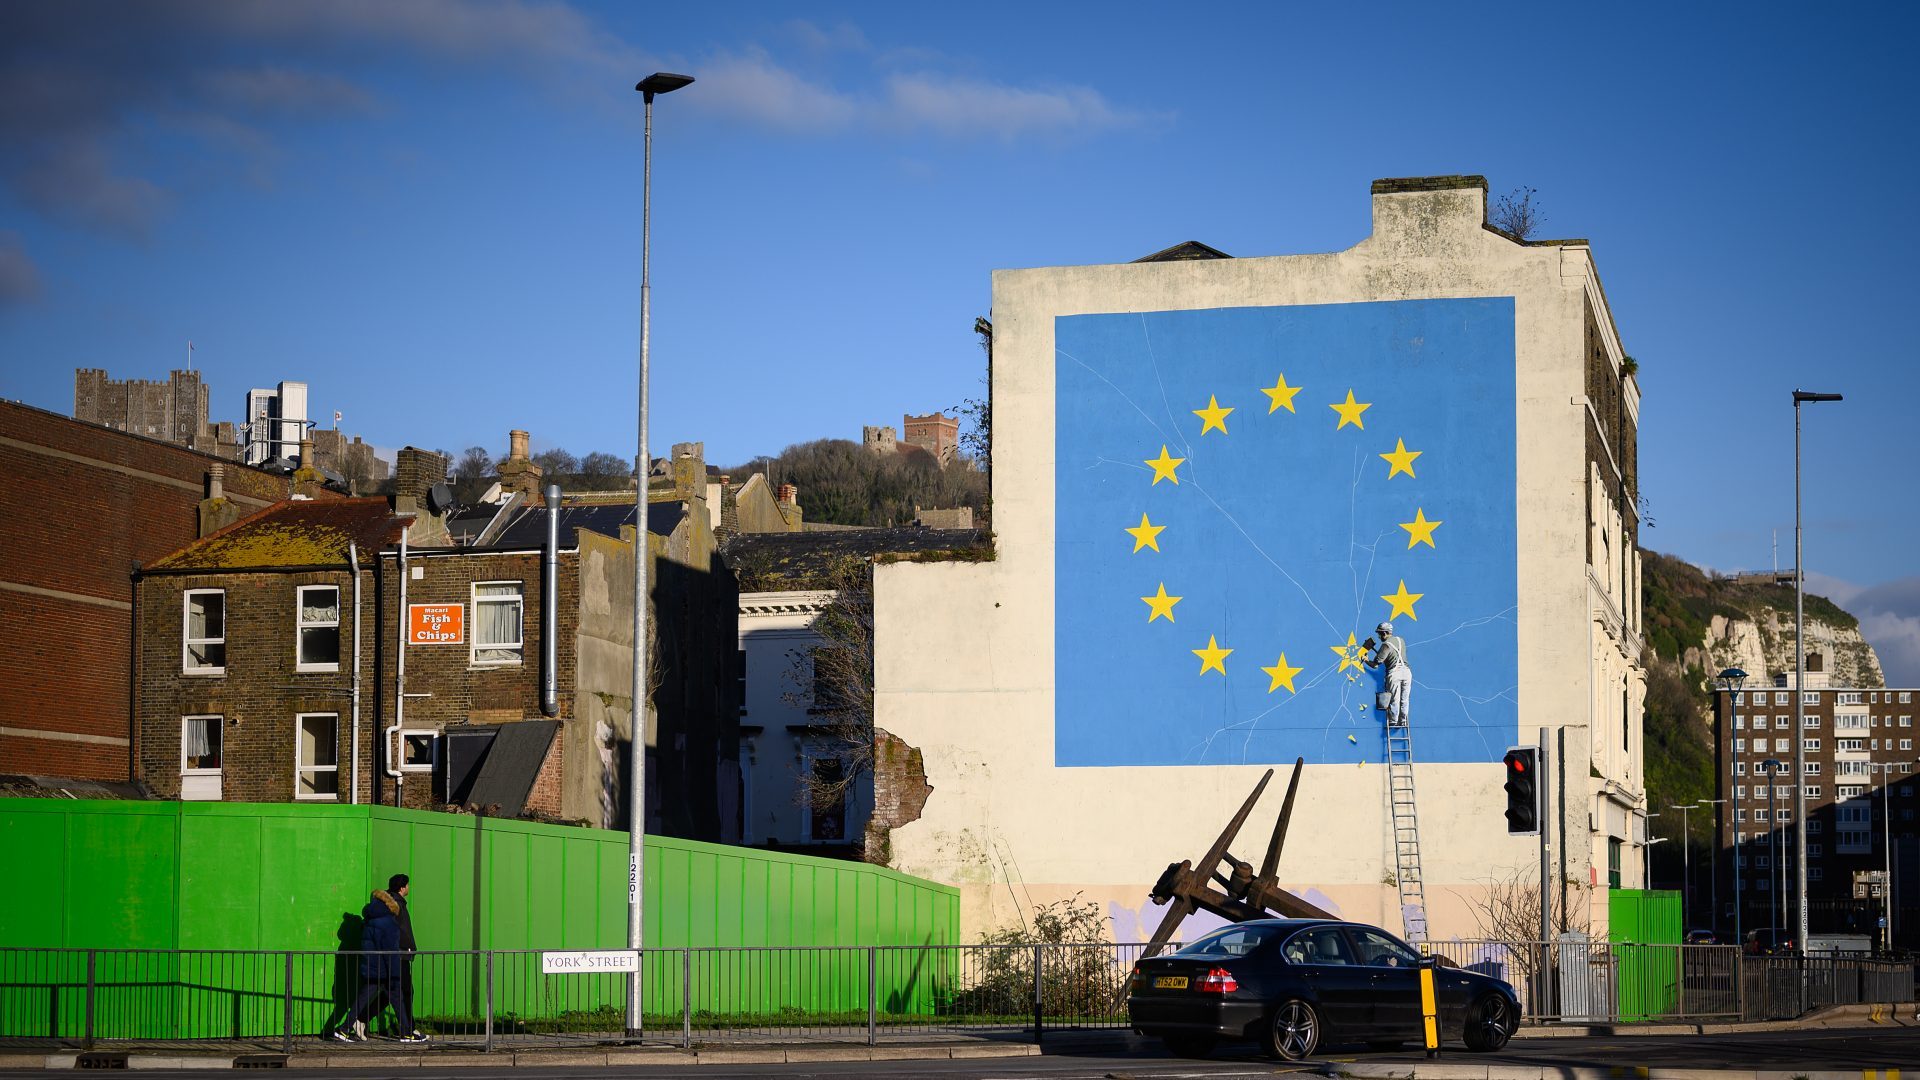 A painting depicting a workman chipping away at a star on the EU flag by artist Banksy. Photo: Leon Neal/Getty Images